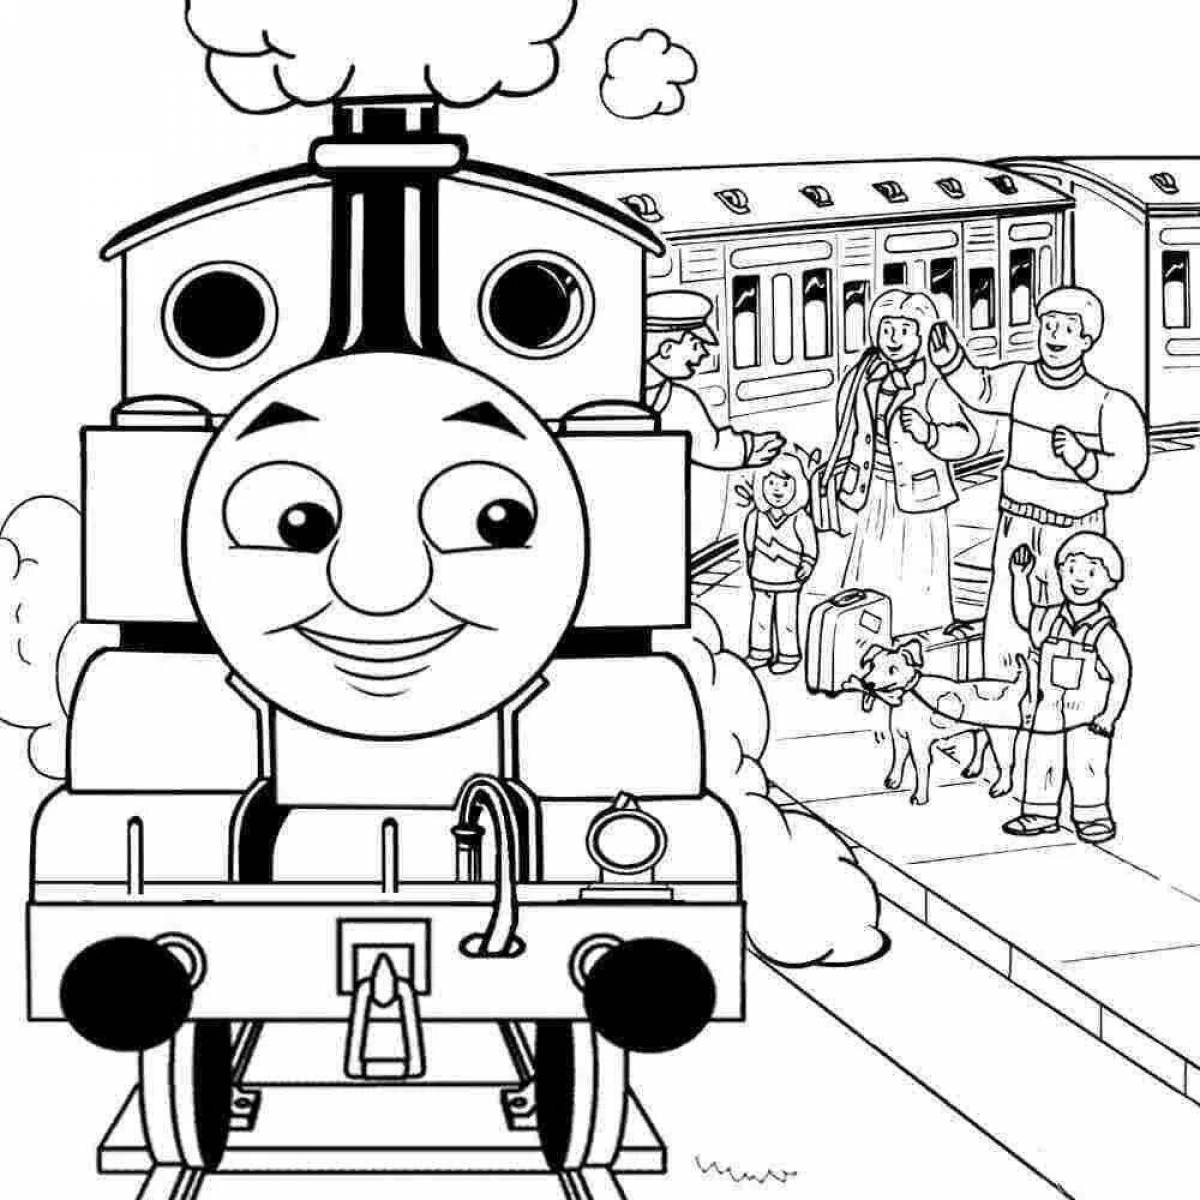 Coloring the nice thomas the engine